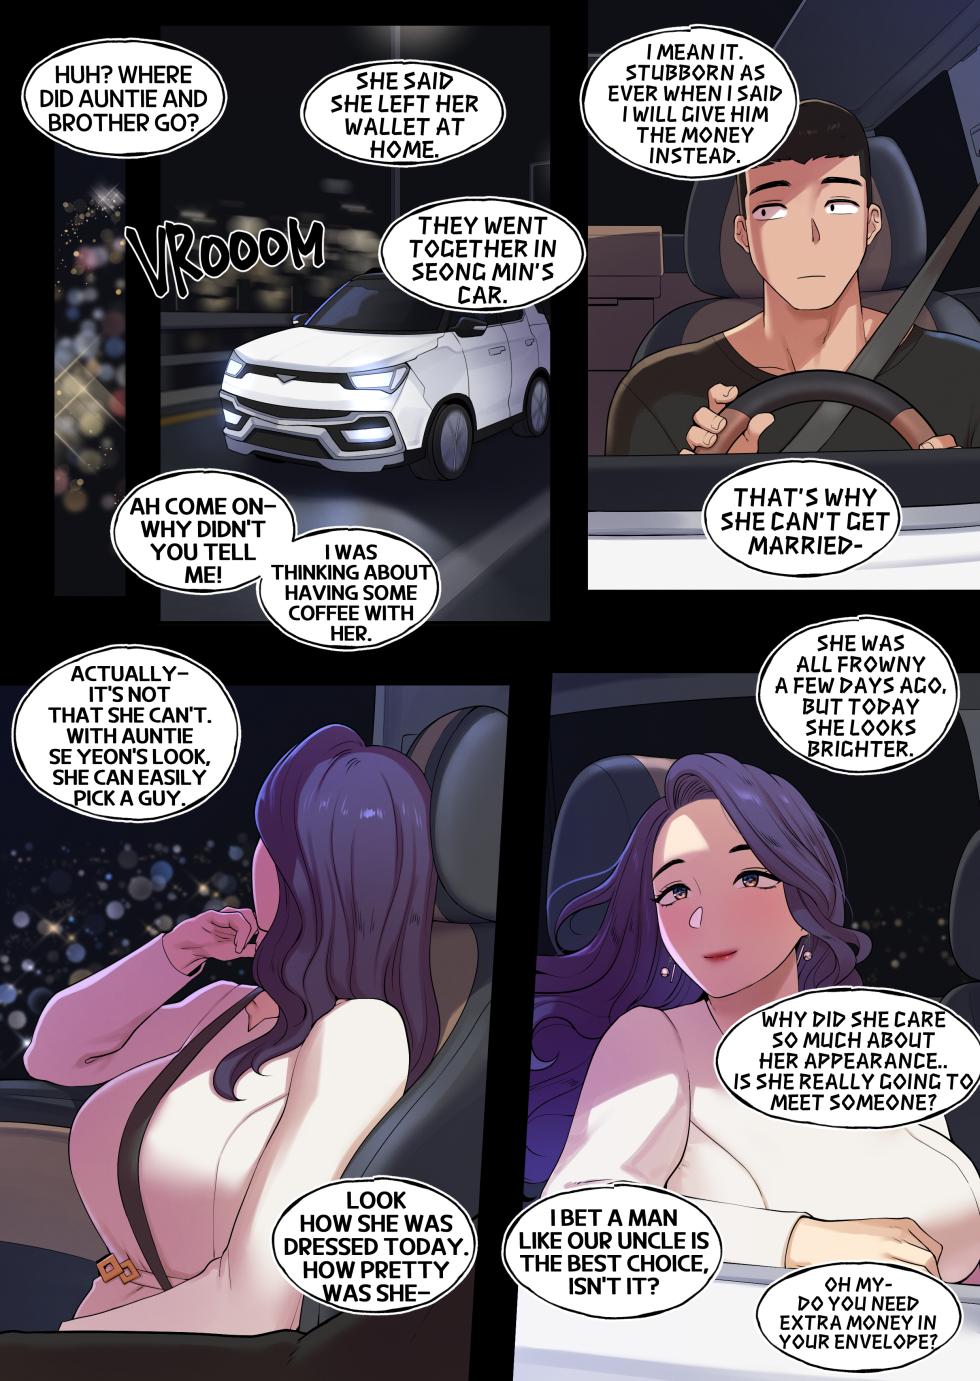 [ABBB] DELIVERY MILF AUNT EPISODE [English] [Decensored] - Page 9